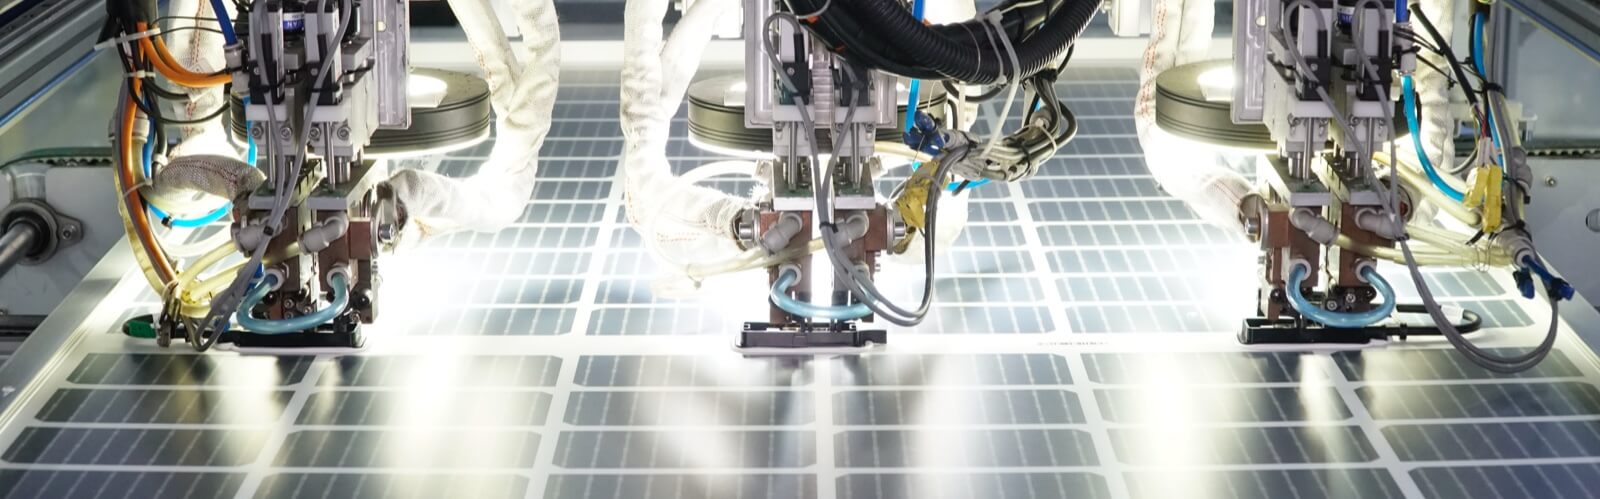 solar PV module being manufactured